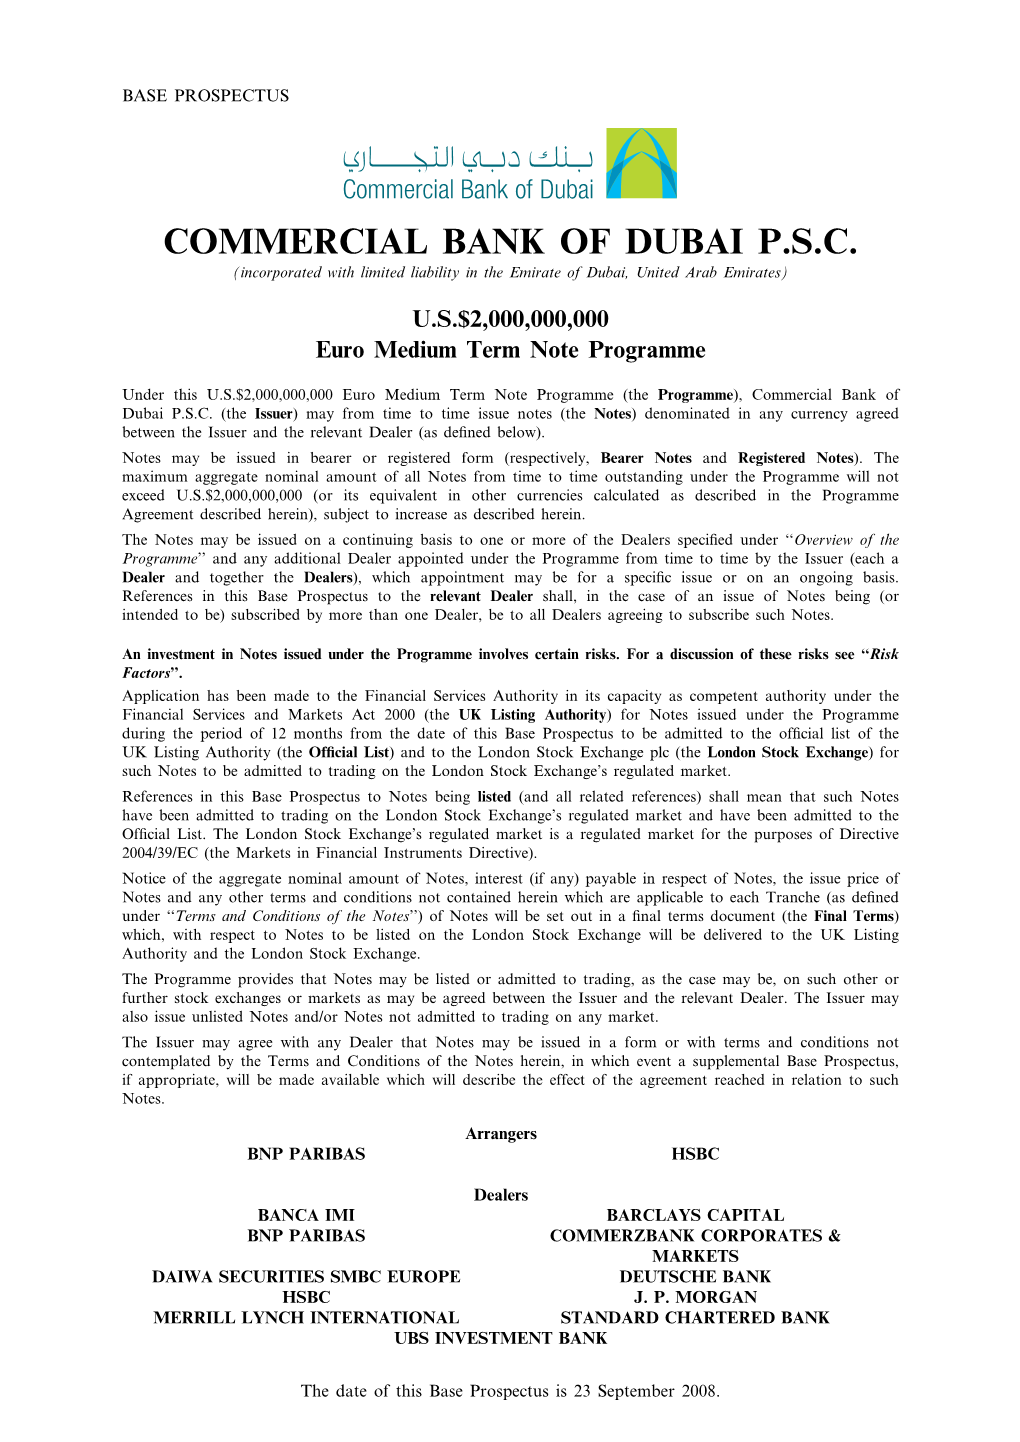 COMMERCIAL BANK of DUBAI P.S.C. (Incorporated with Limited Liability in the Emirate of Dubai, United Arab Emirates)